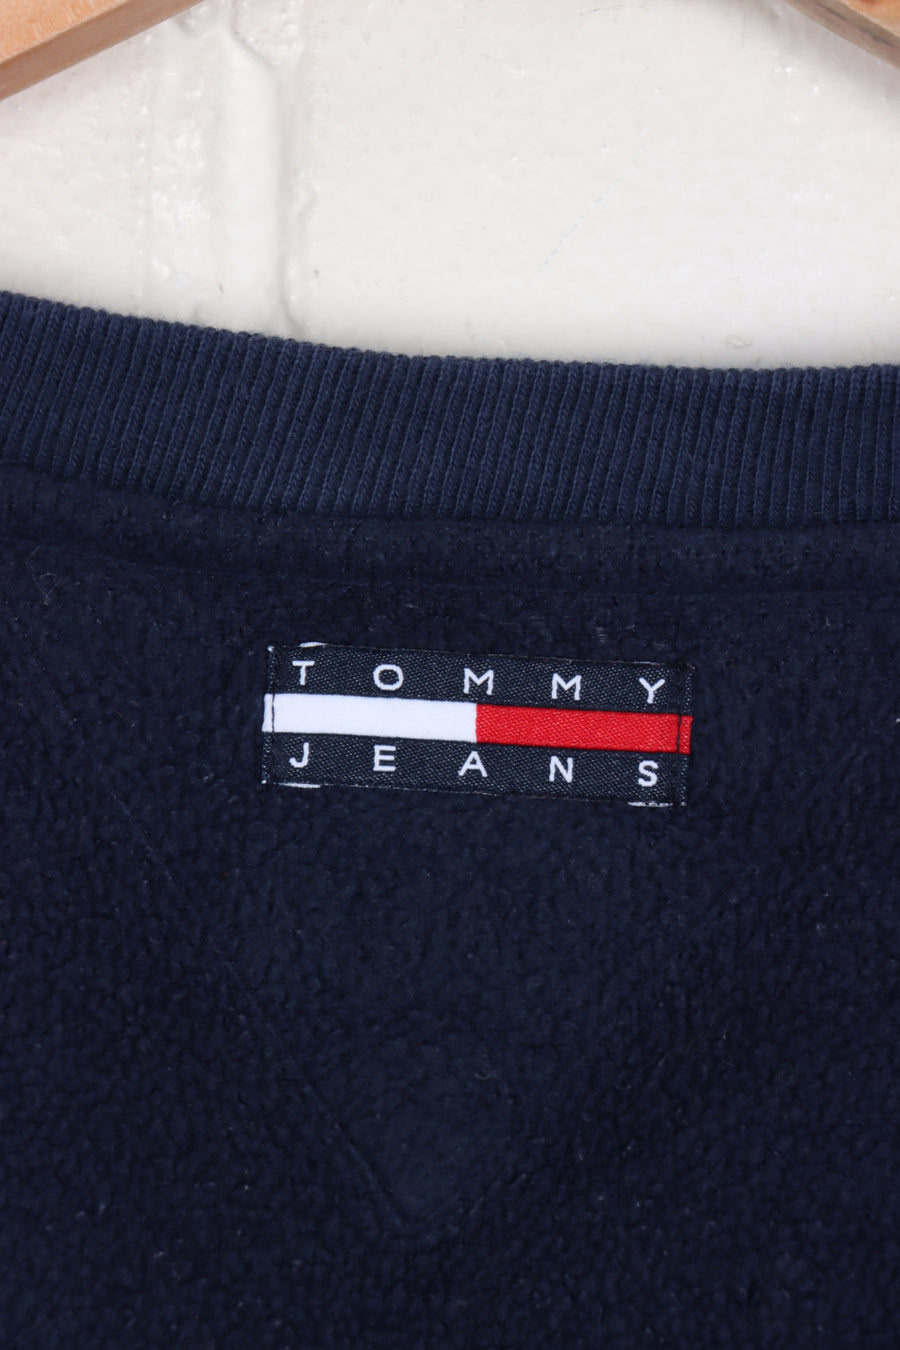 TOMMY HILFIGER Striped & Embroidered Fleece (XL)